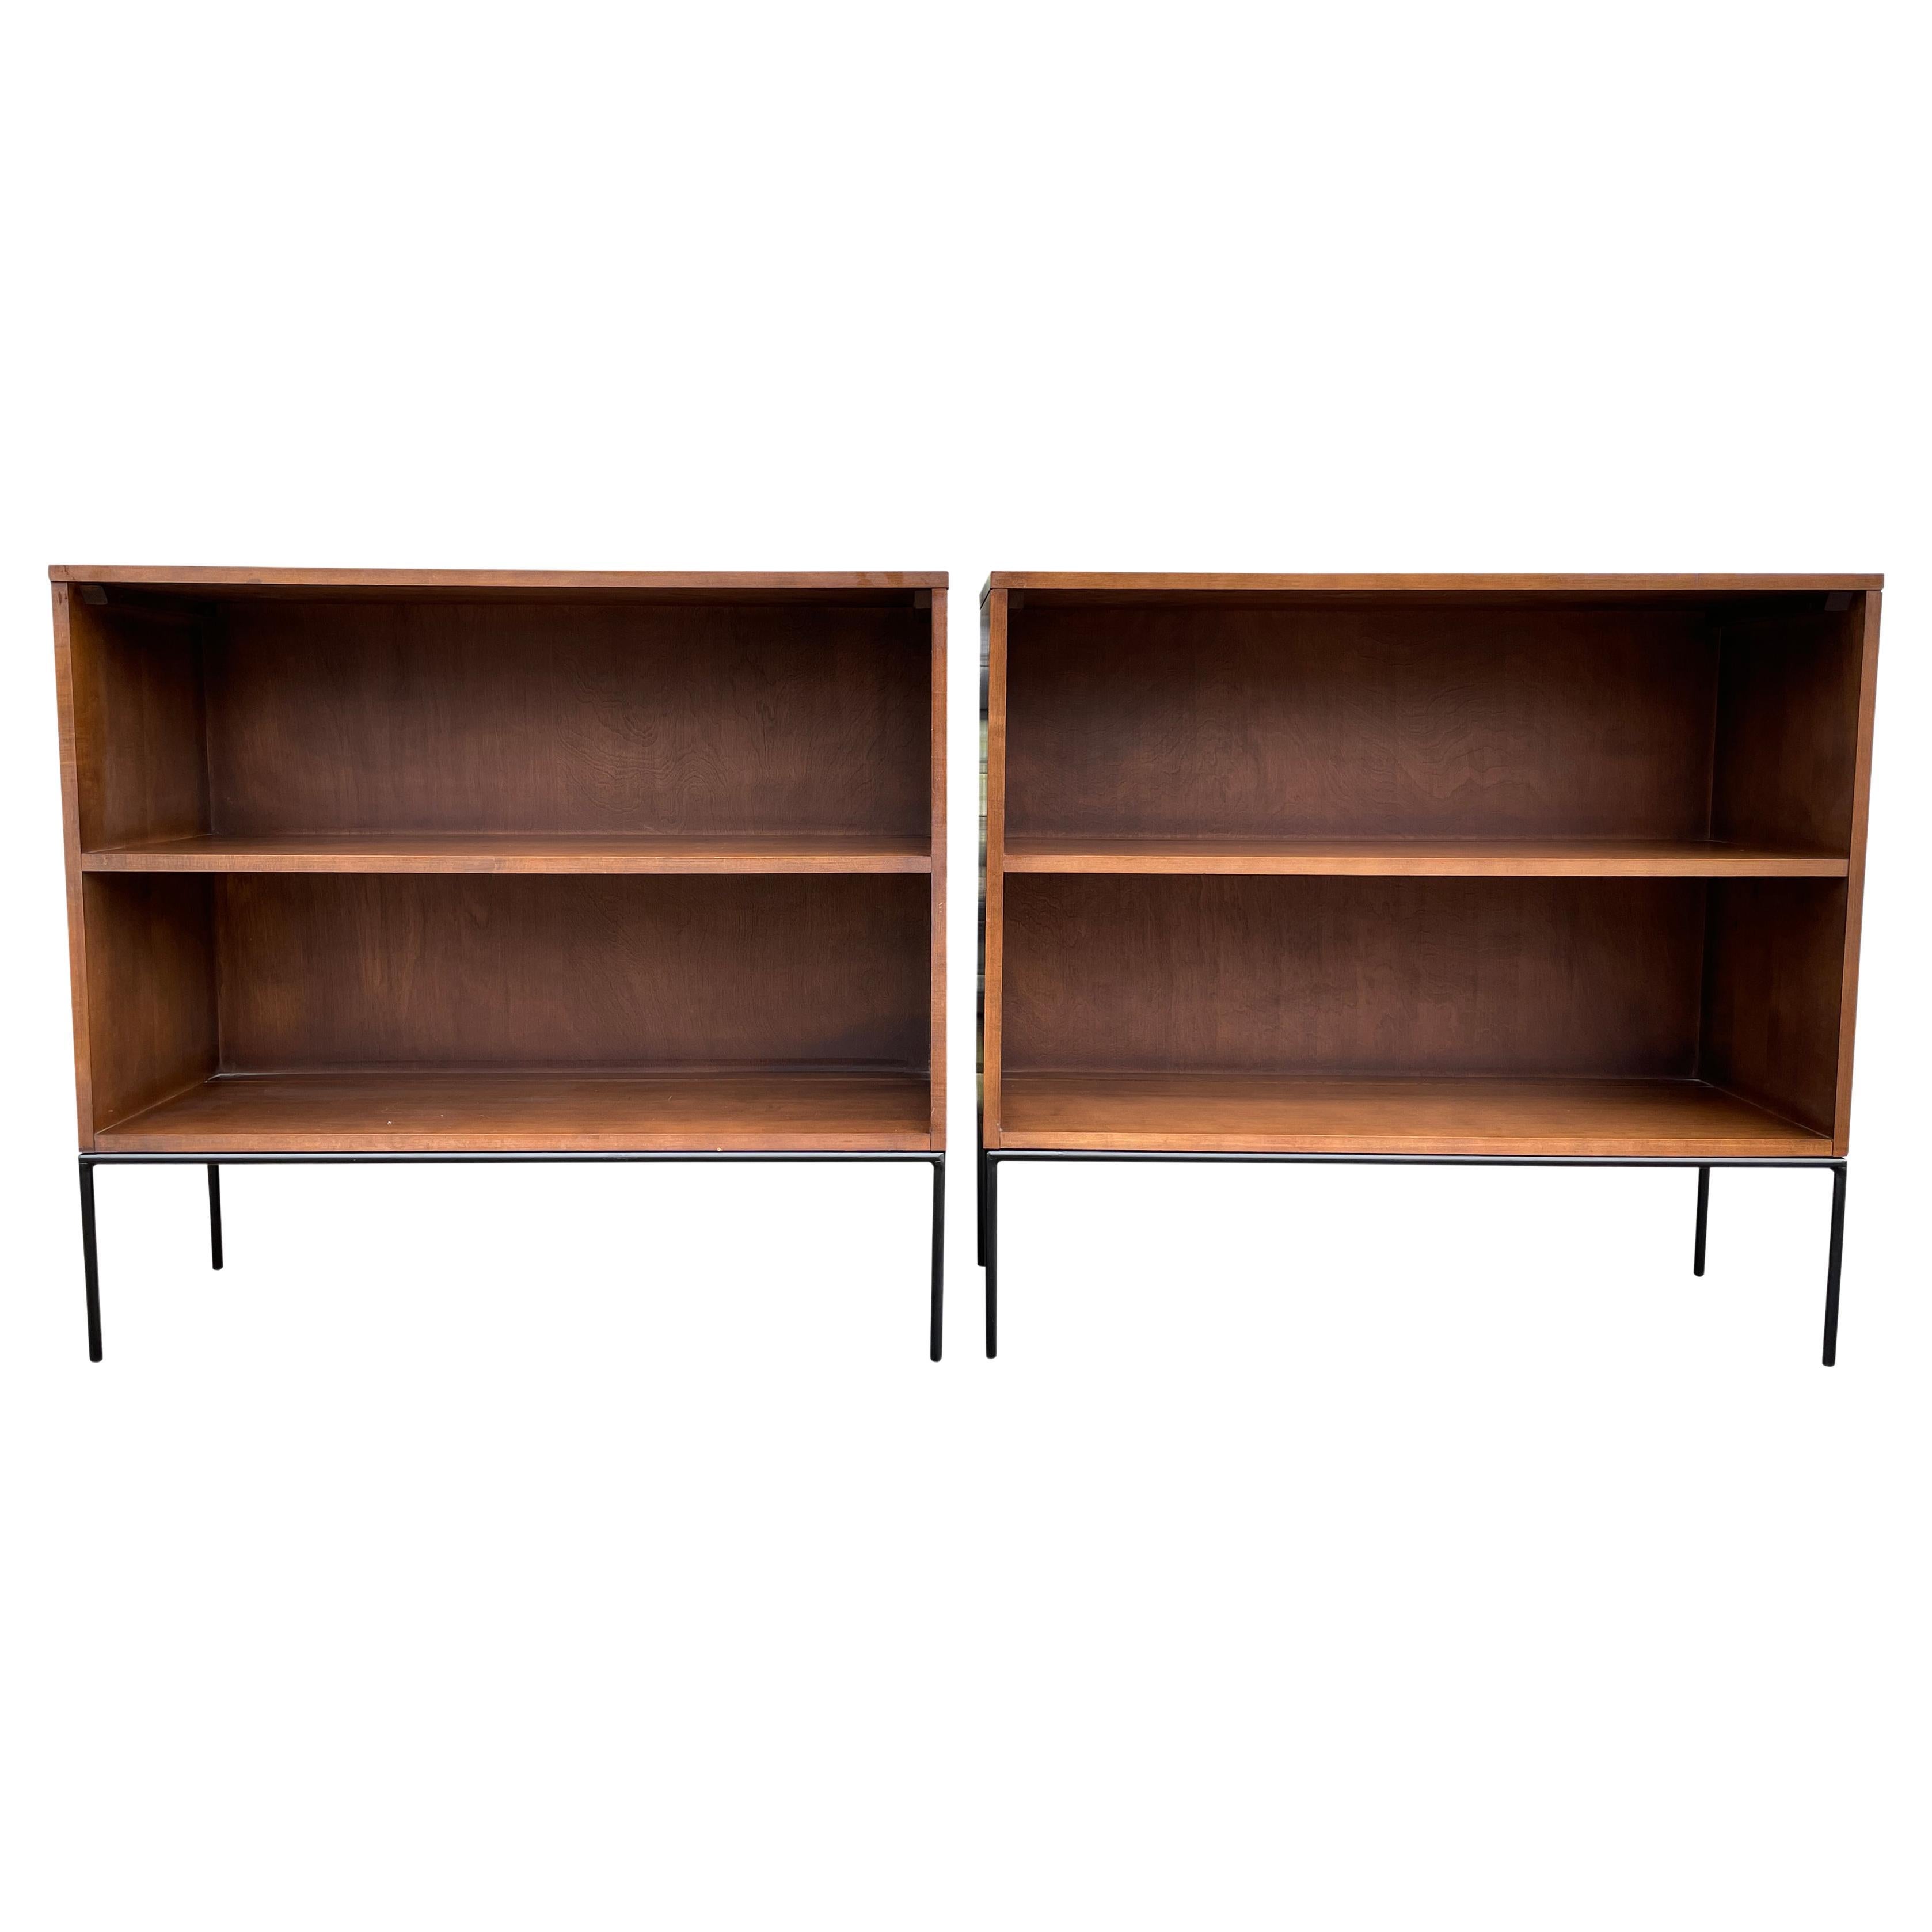 Winchendon Furniture (Planner Group) Bookcases